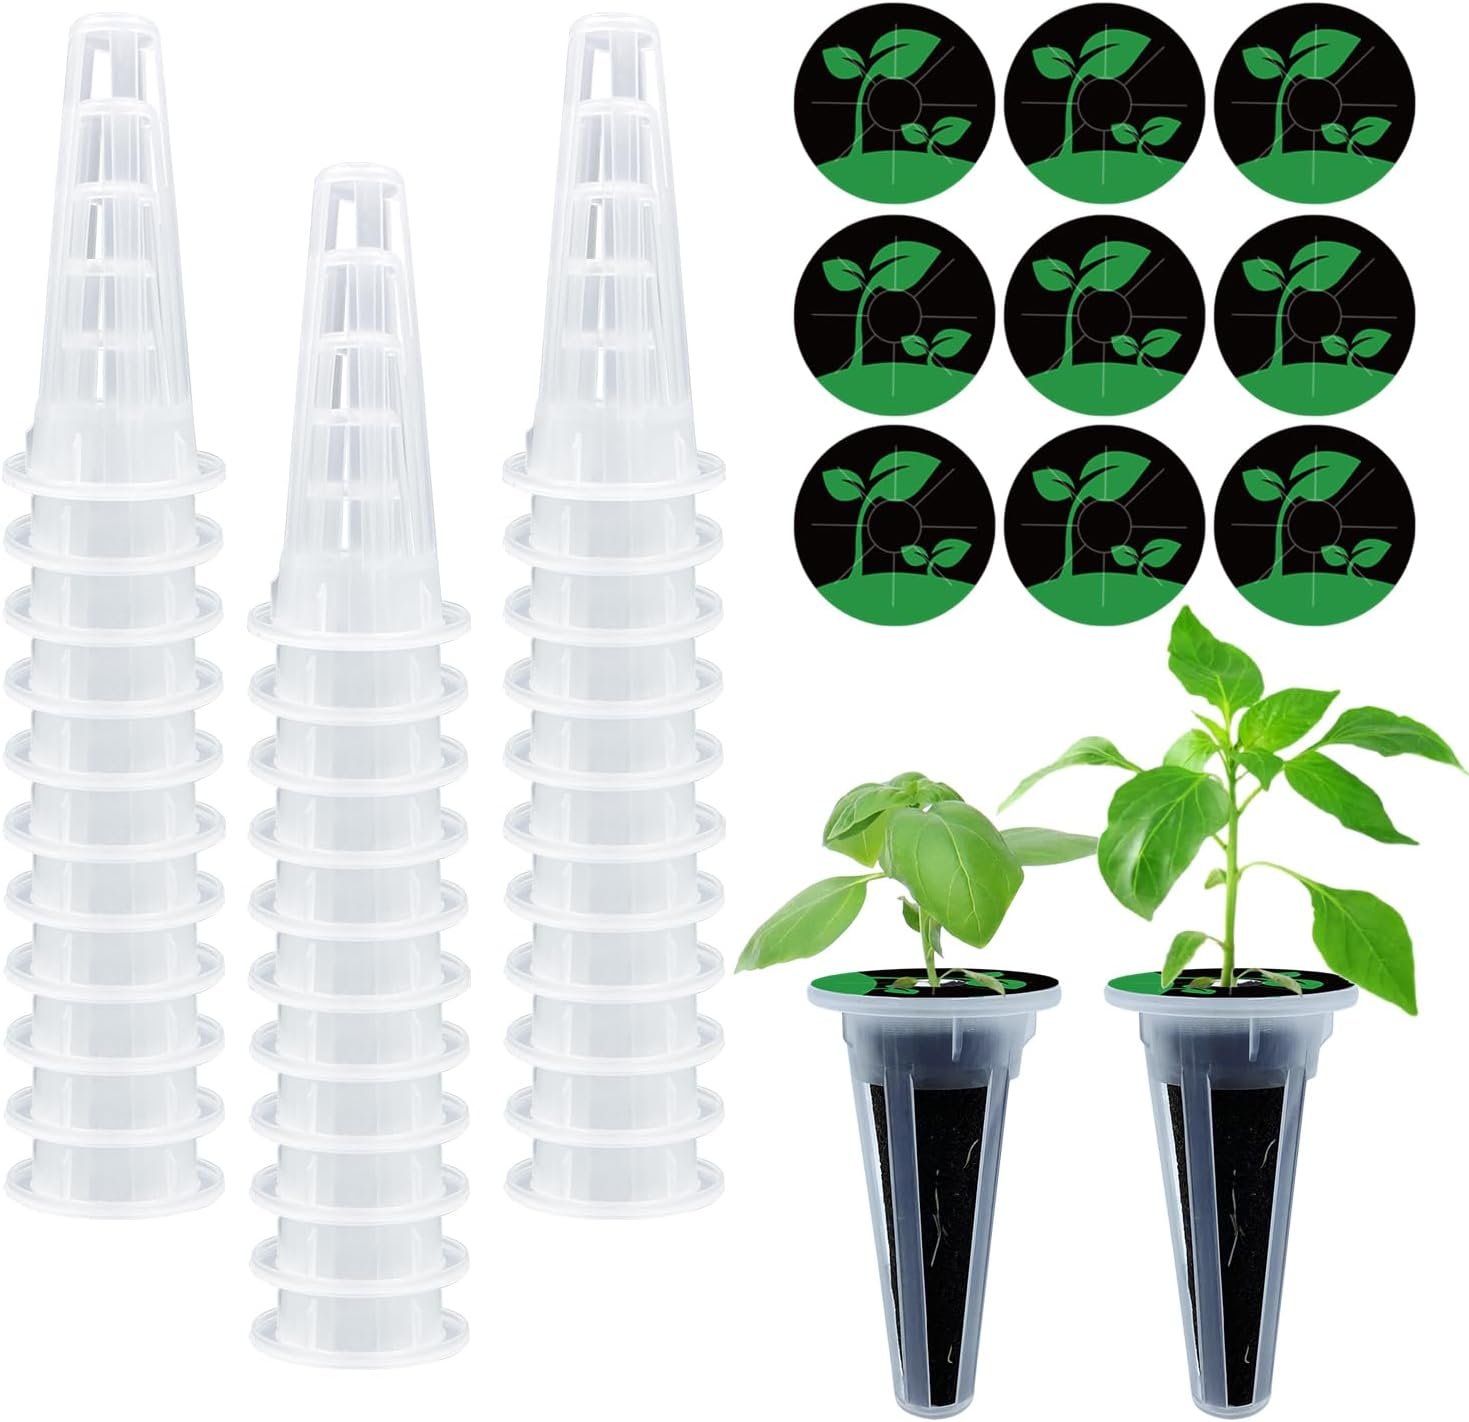 Oliz 50 Pack Hydroponic Grow Baskets with 51PCS Seed Pod Labels Stickers, Replacement Garden DIY Accessories for Most Hydroponic Growing System